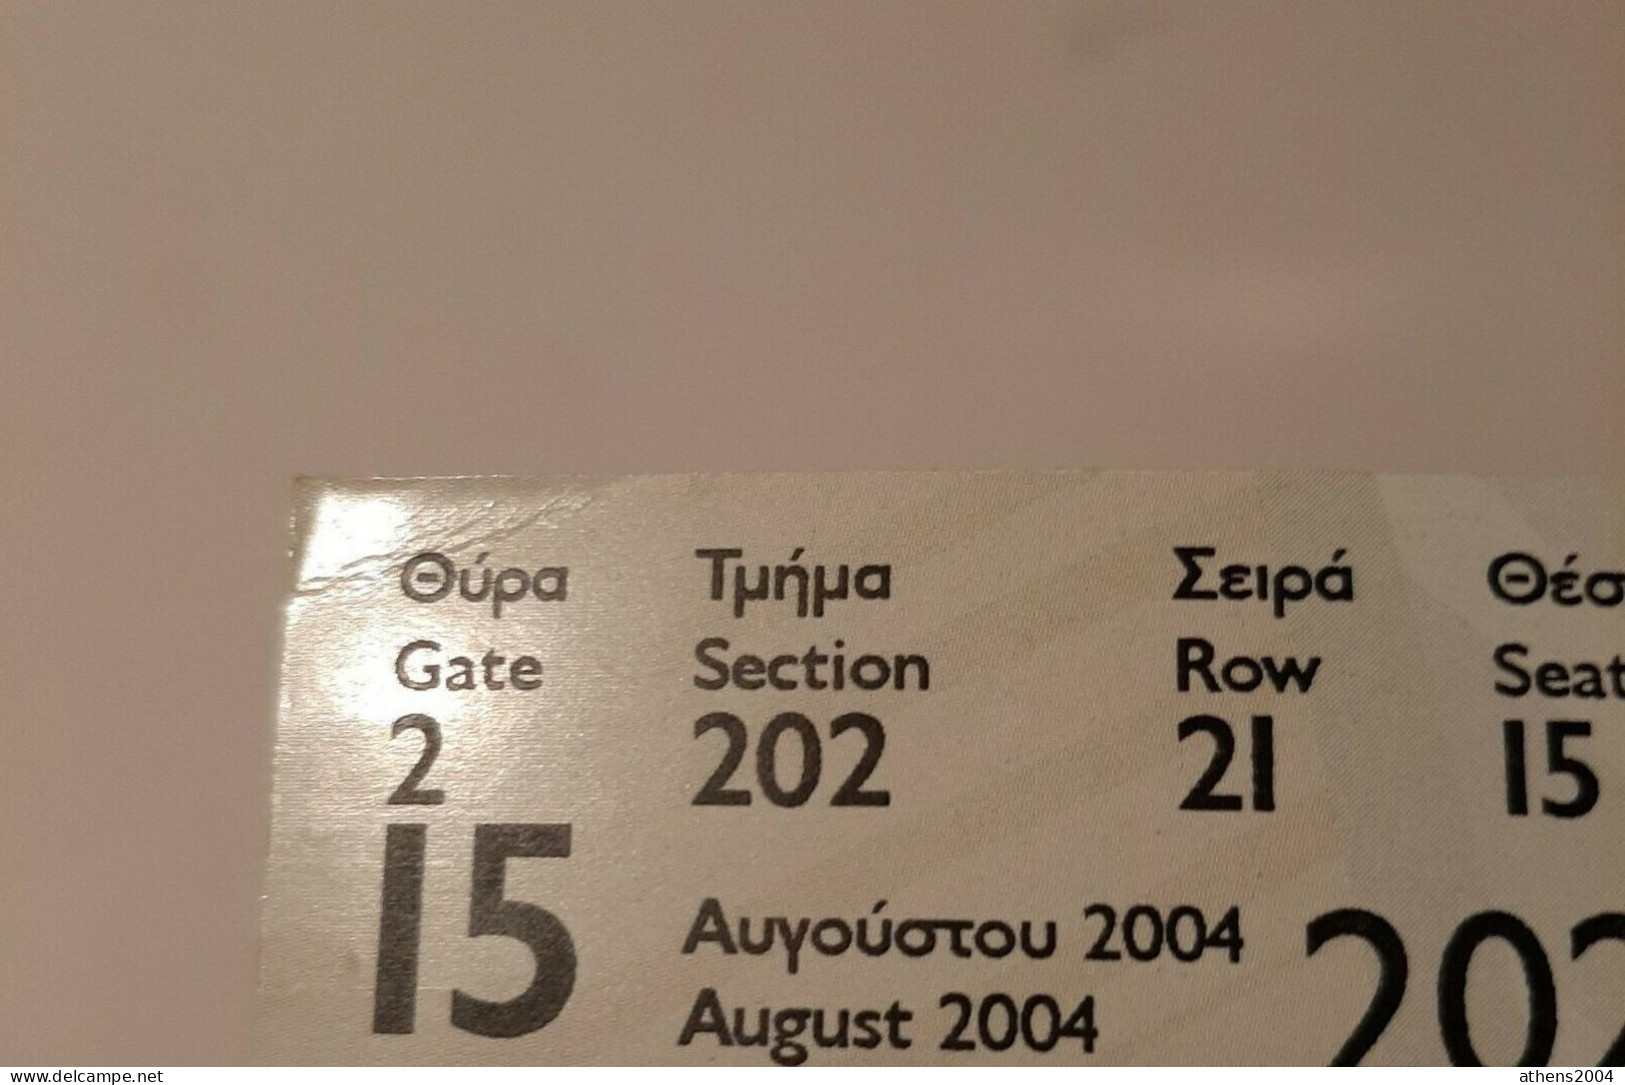 Athens 2004 Olympic Games -  Fencing Unused Ticket, Code: 202 - Apparel, Souvenirs & Other